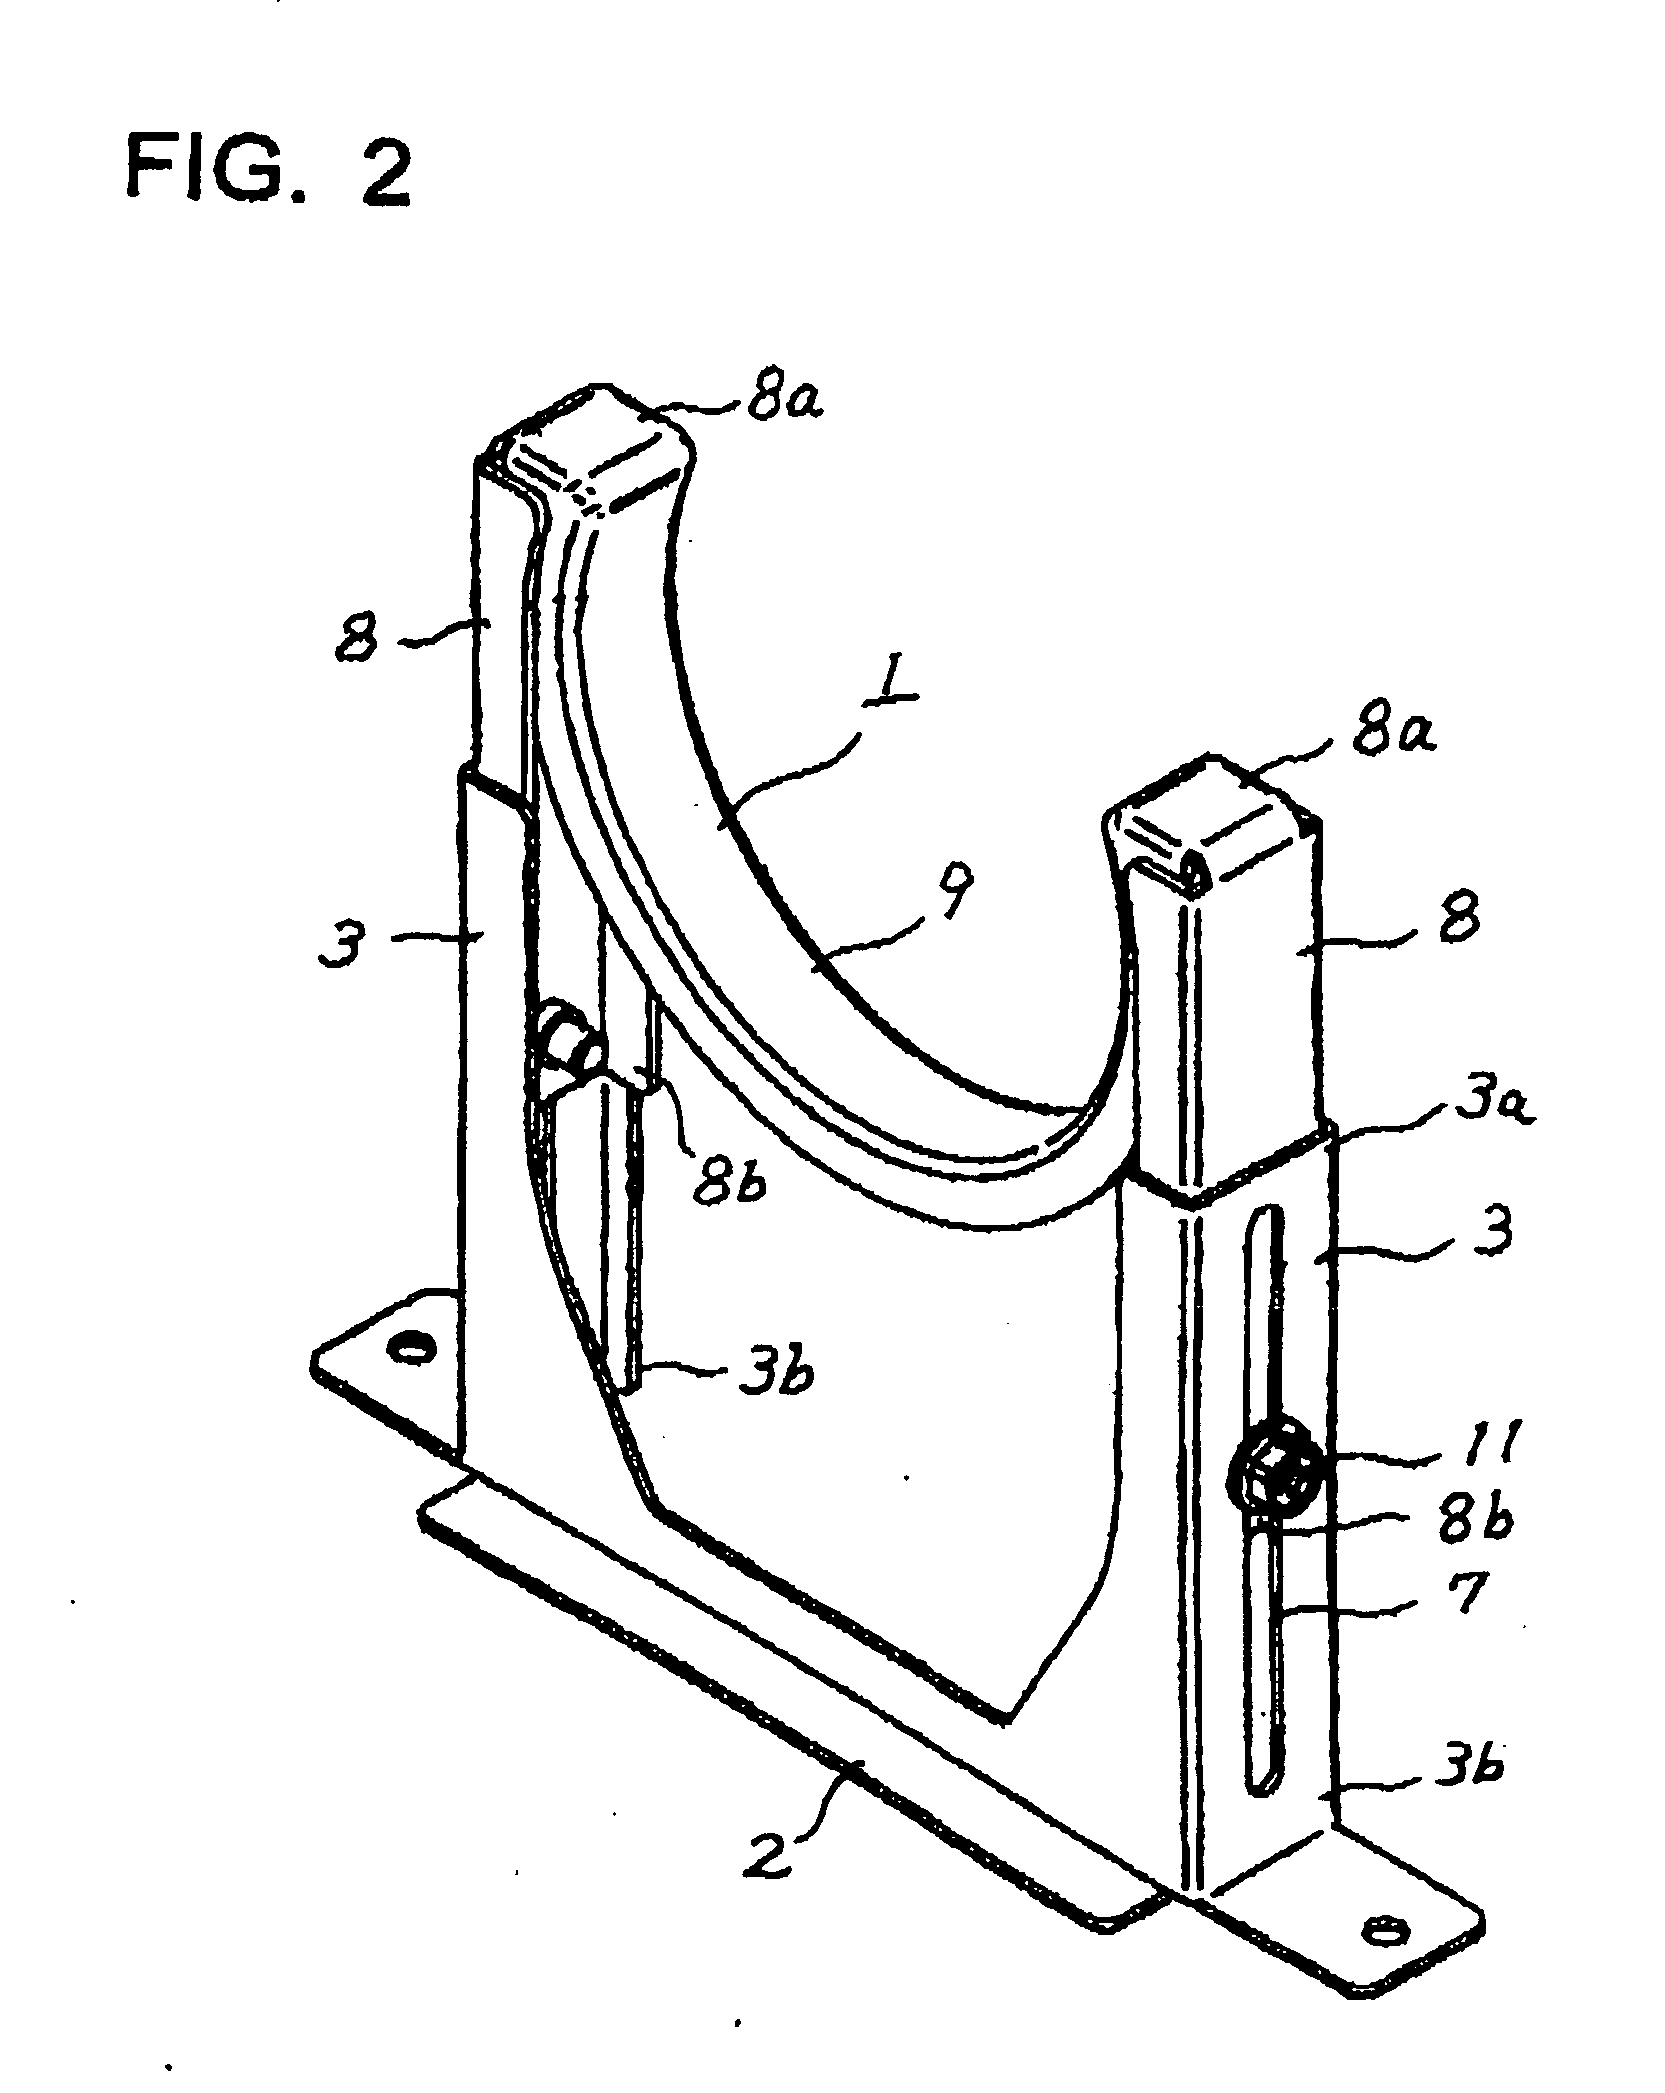 Vertically adjustable pipe support apparatus